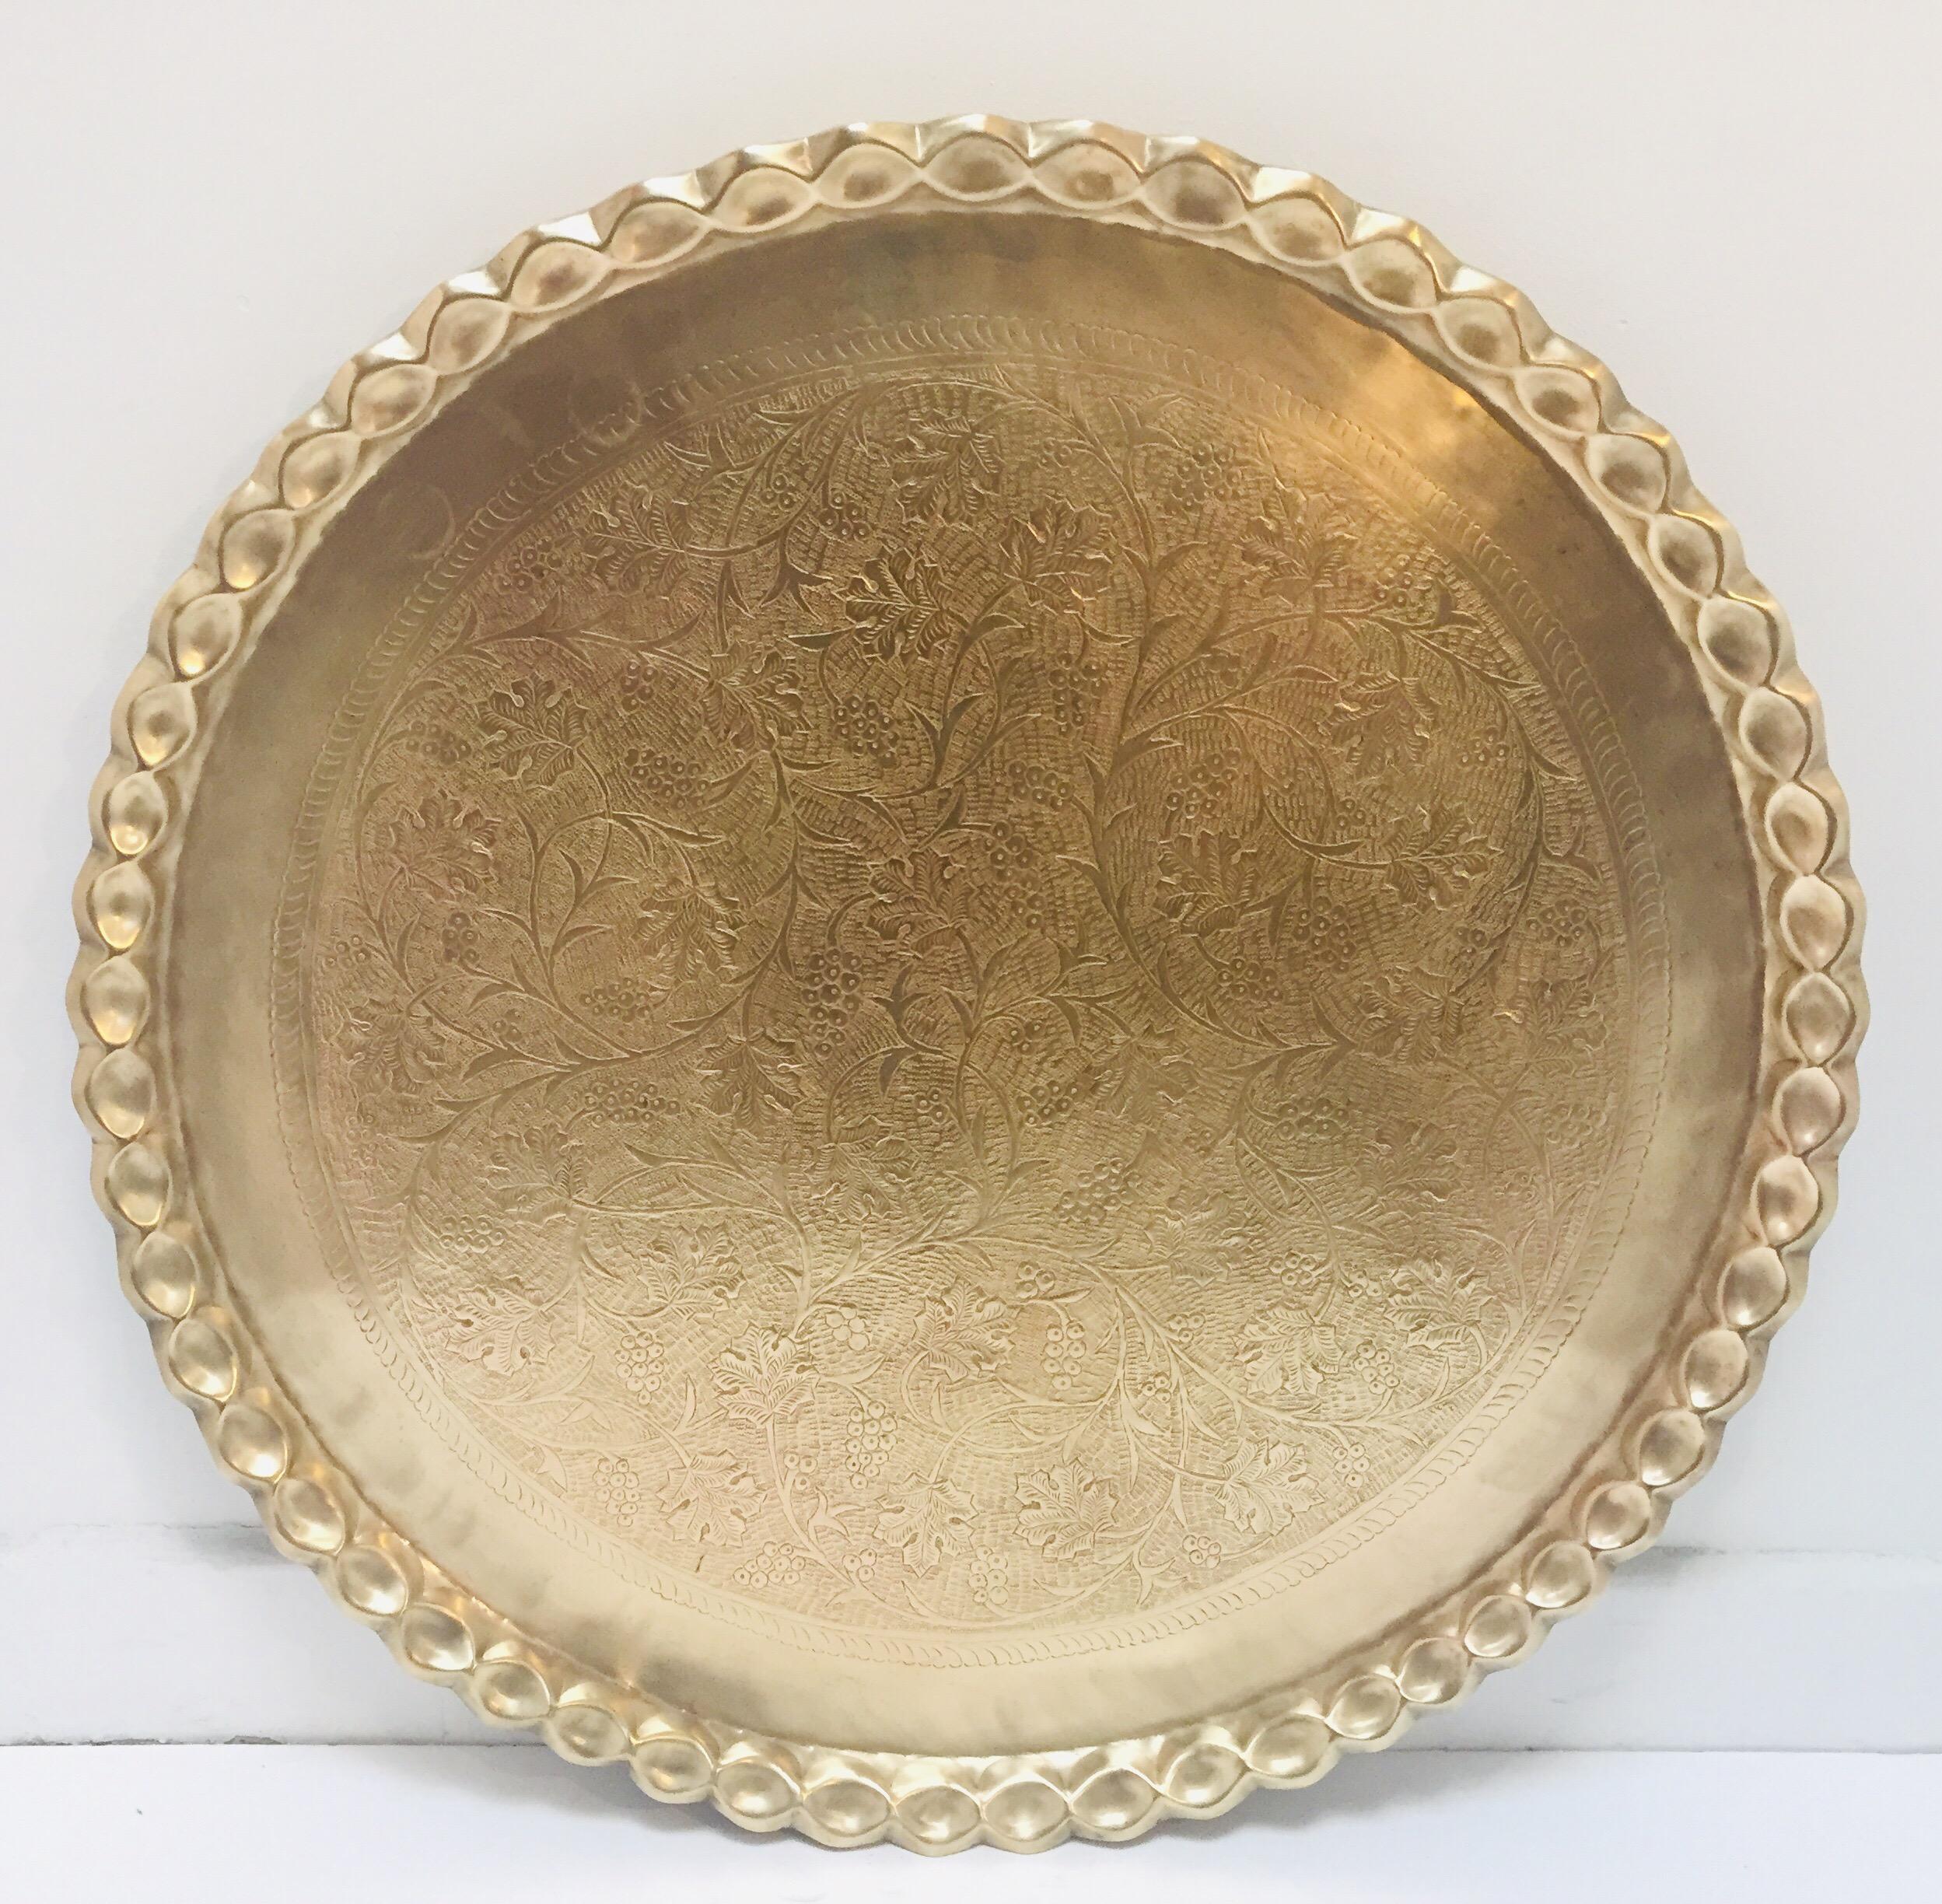 Large Moroccan round brass tray.
Engraved and embossed large 39.5 inches round midcentury Moroccan brass tray.
Polished brass Moroccan tray, very good condition.
Very hard to find 39.5 inches diameter large metal hand-hammered brass tray .
Middle